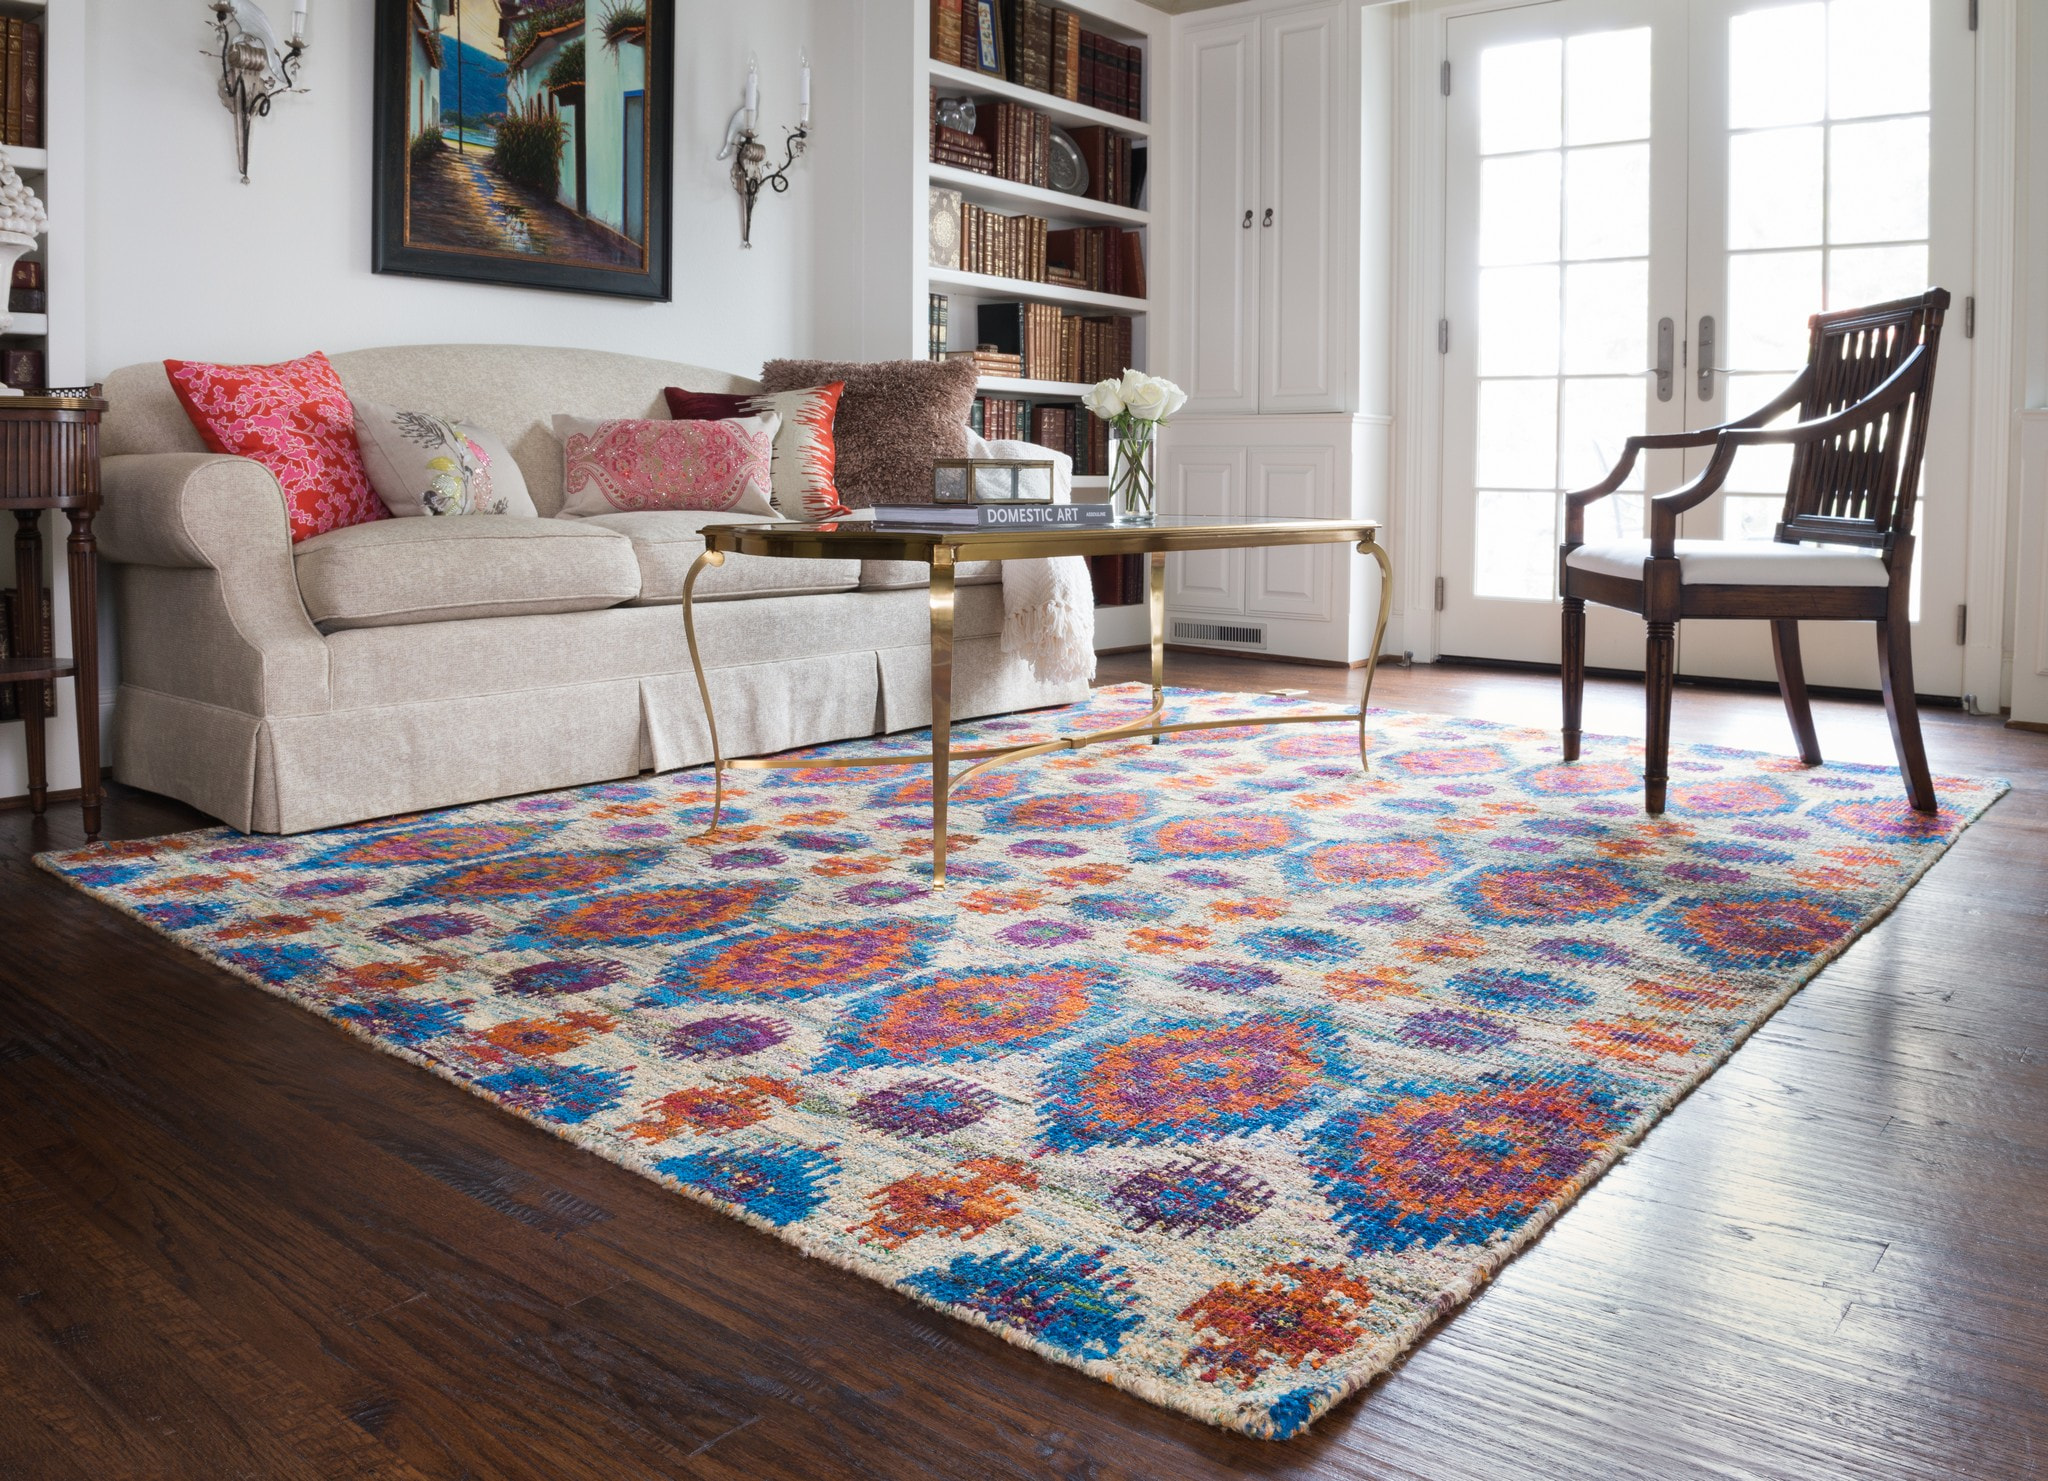 What are Standard Rug Sizes? | PlushRugs